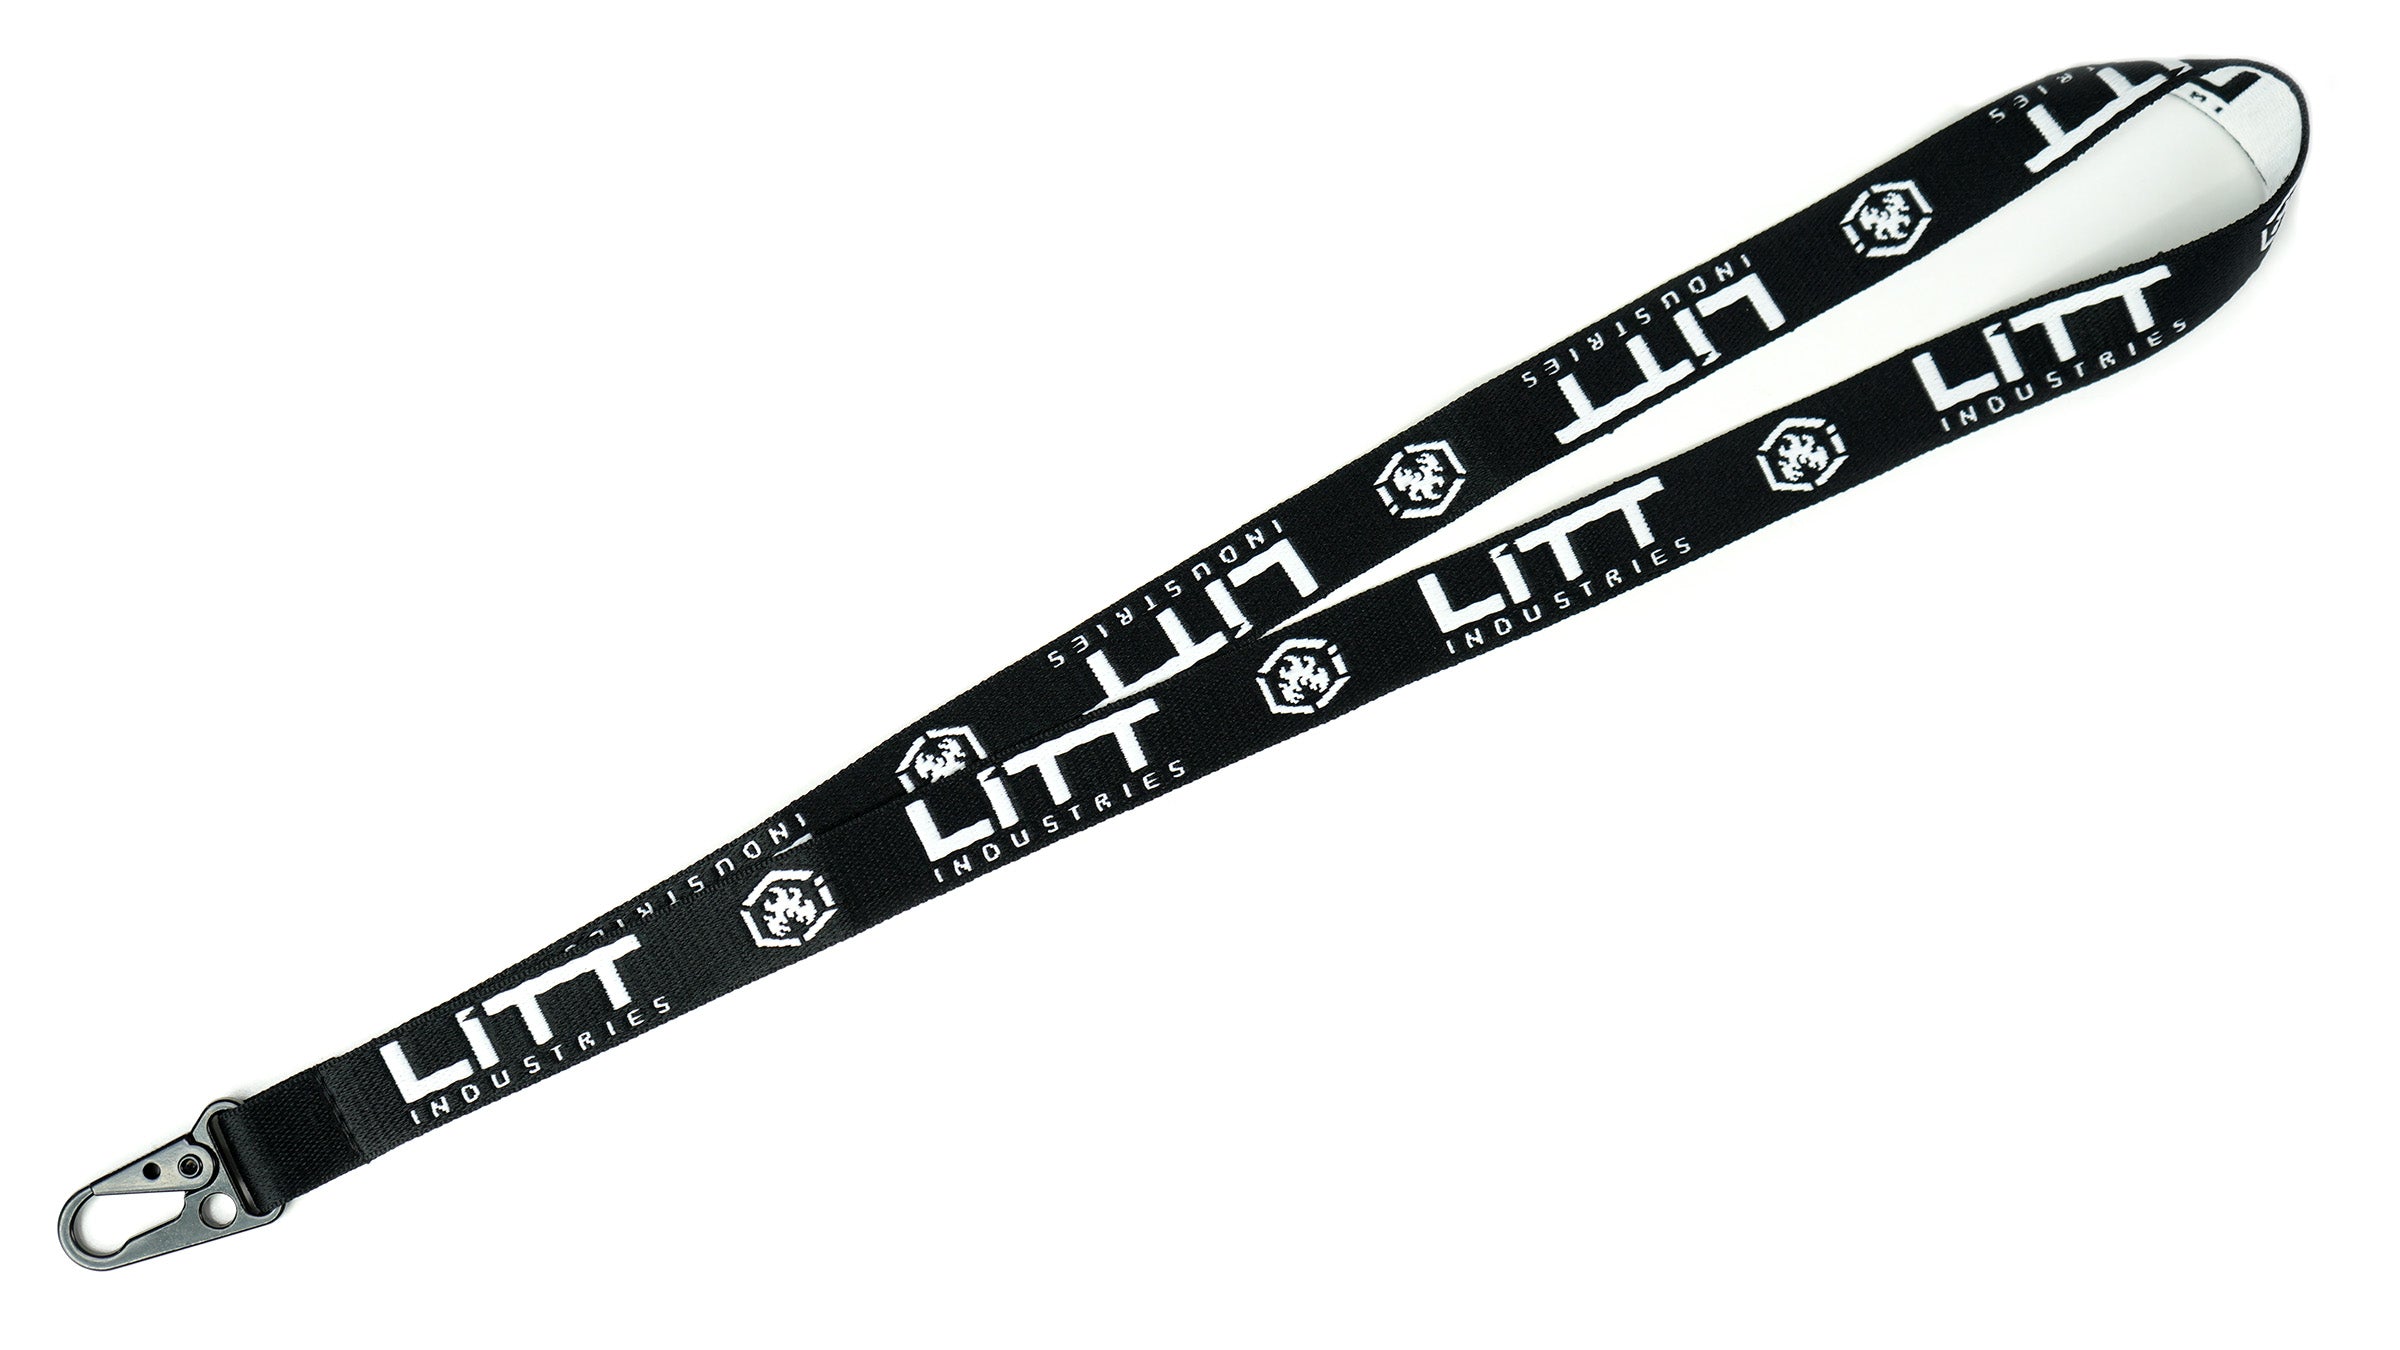 Litt Industries high quality heavy duty durable lanyards red yellow or white metal clip for extra security the best lanyards on the market black and white logo